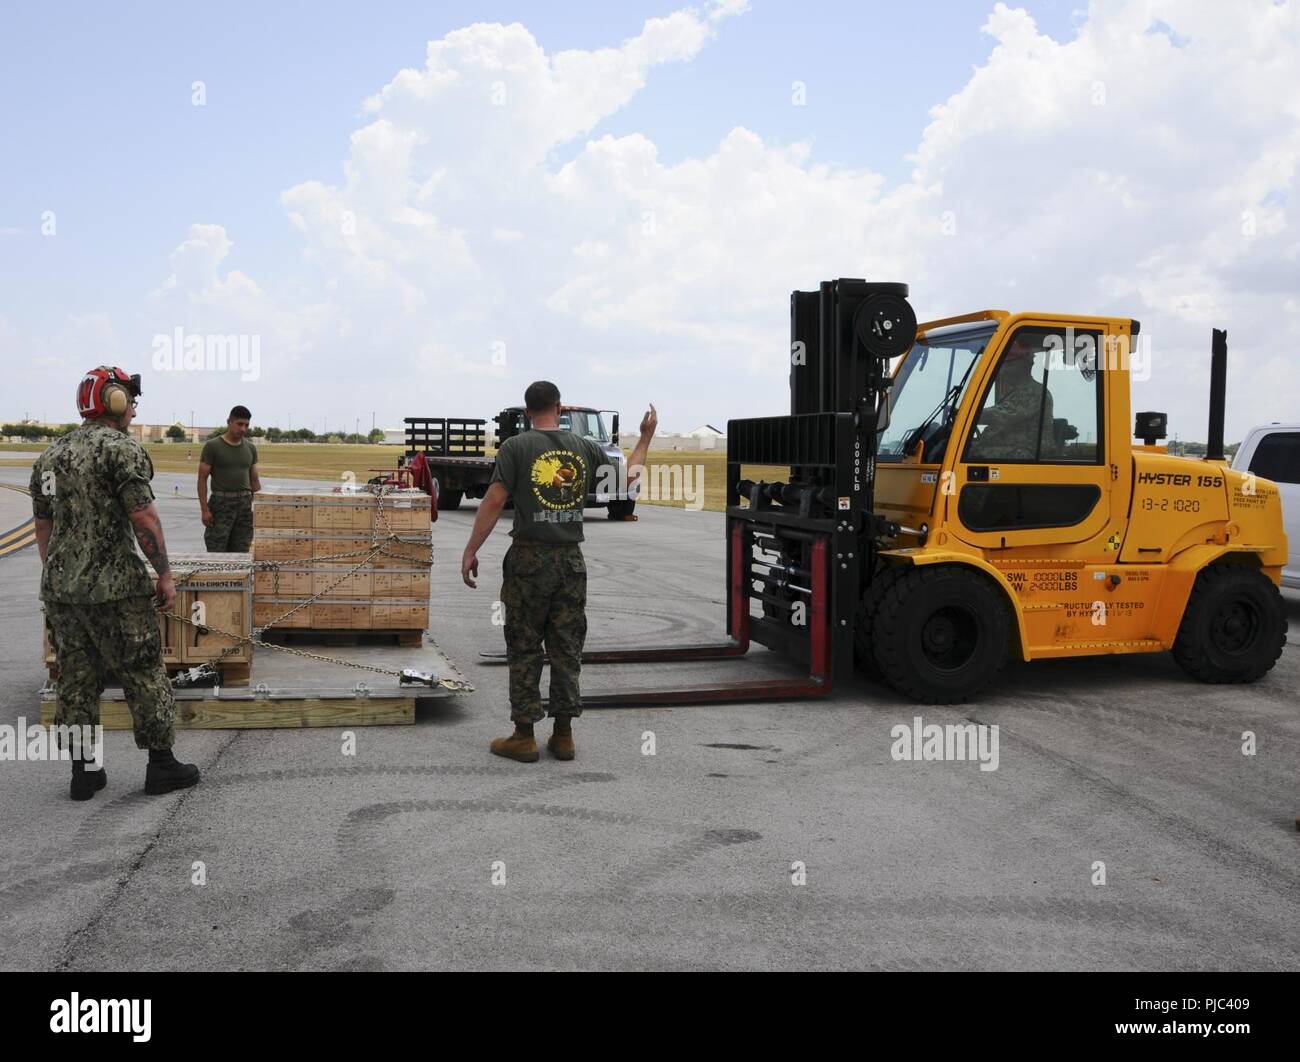 Fort Worth Texas July 12 2018 Staff Sgt Benjamin Reynolds From Marine Forces North Signals Forklift Operator Aviation Ordnanceman 2nd Class Christian Aldana Valdez From Naval Air Station Fort Worth Joint Reserve Base